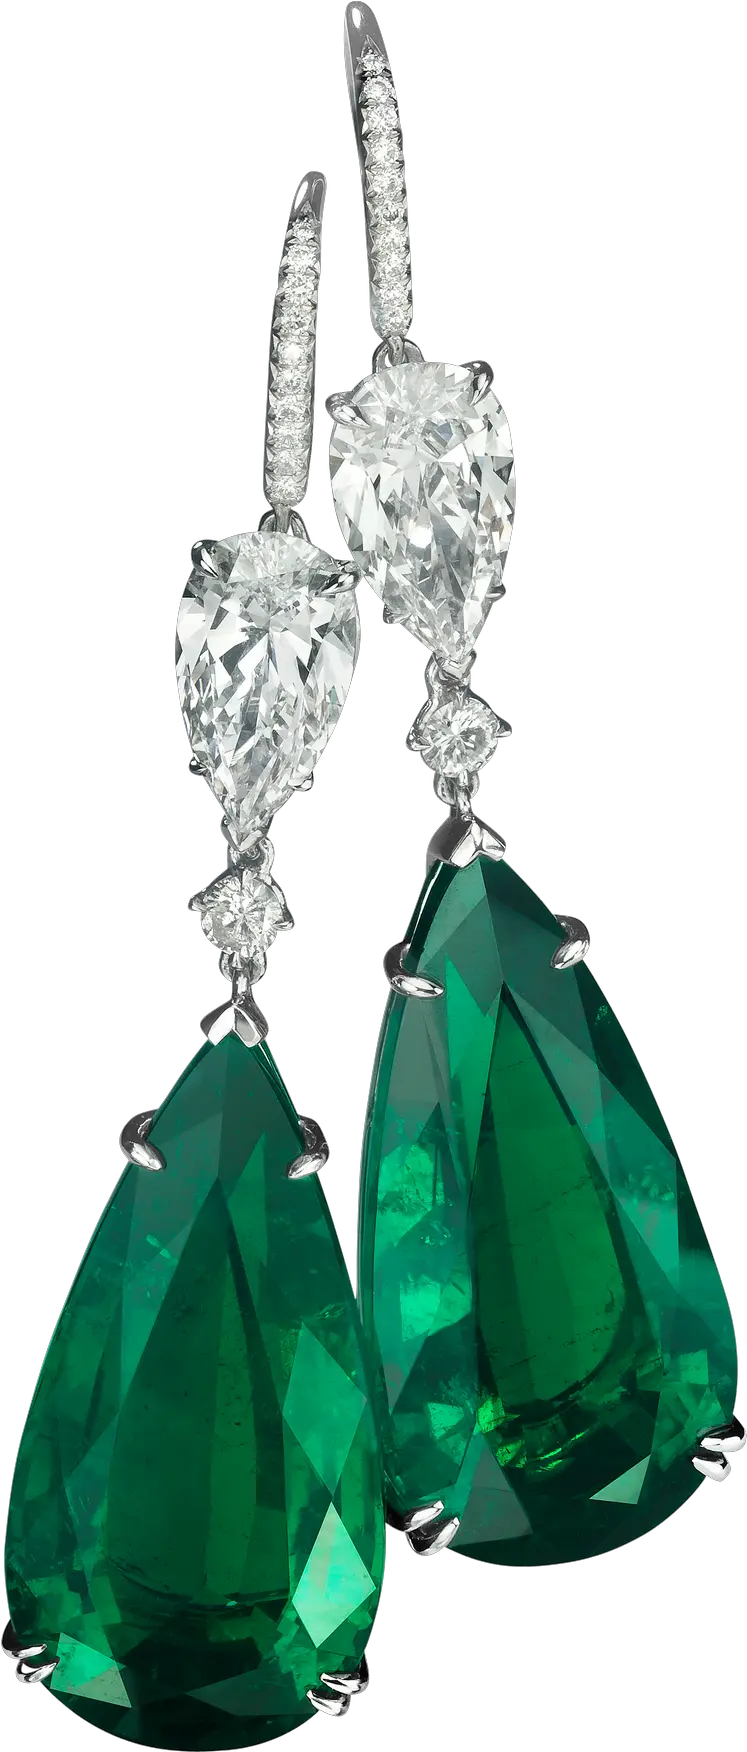 Download Green Stone Earring Png Image Transparent Green Earrings Png Earring Png